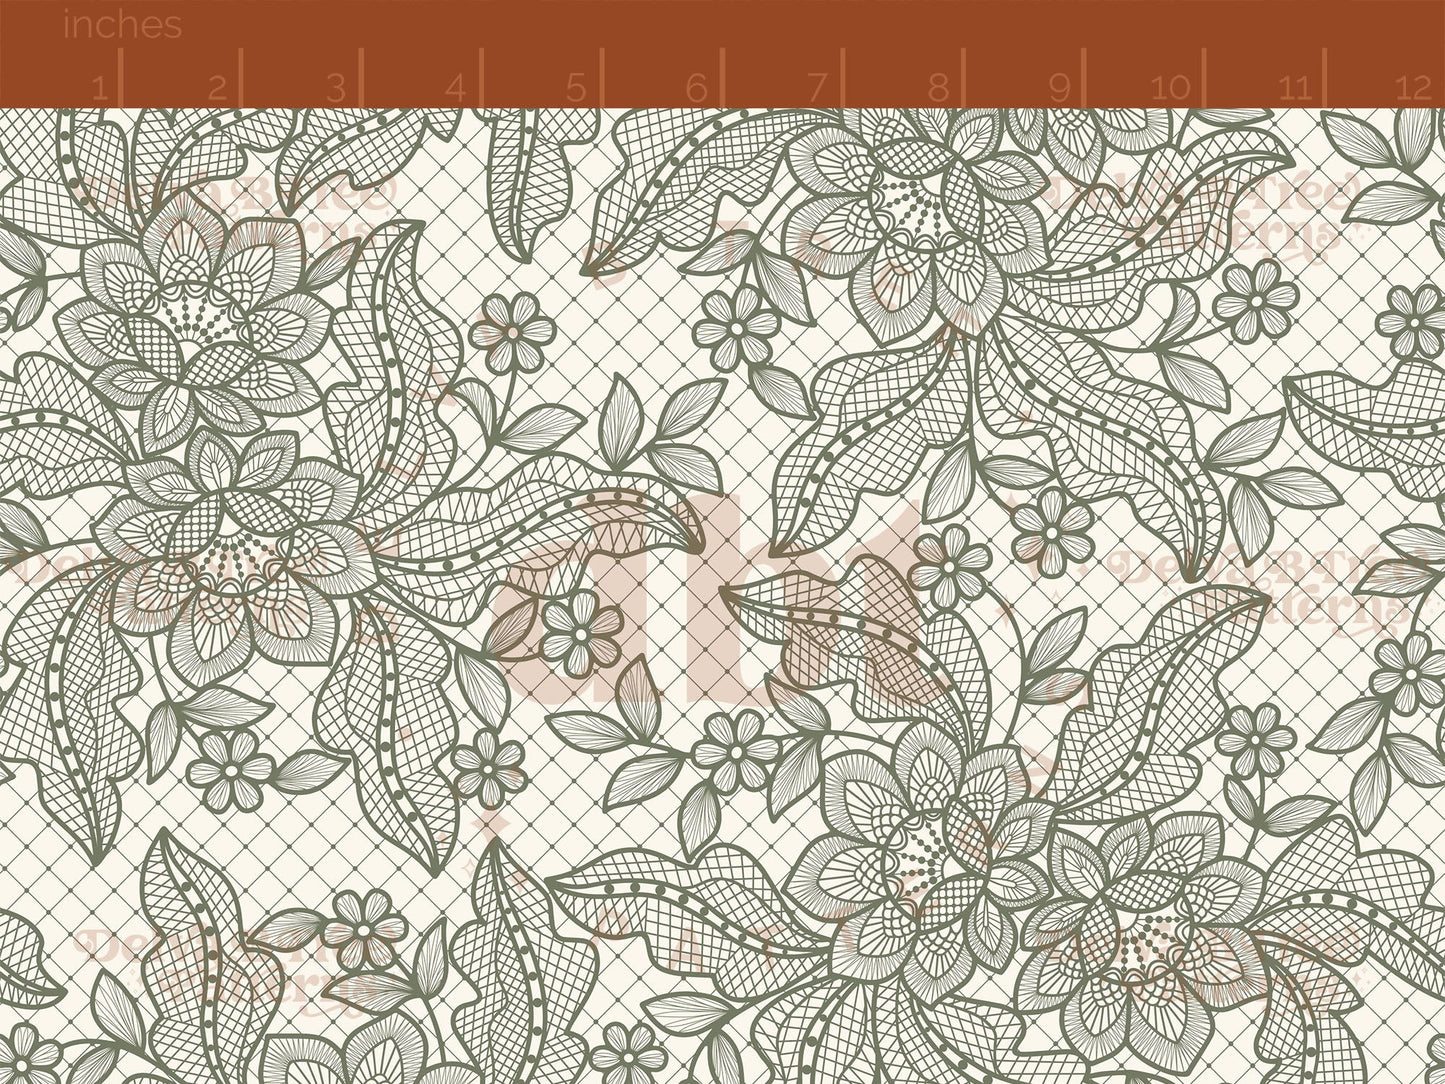 Camouflage Green flowers, leaves and faux lace netting on an off white / ivory / cream background seamless pattern scale digital file for small shops that make handmade products in small batches.